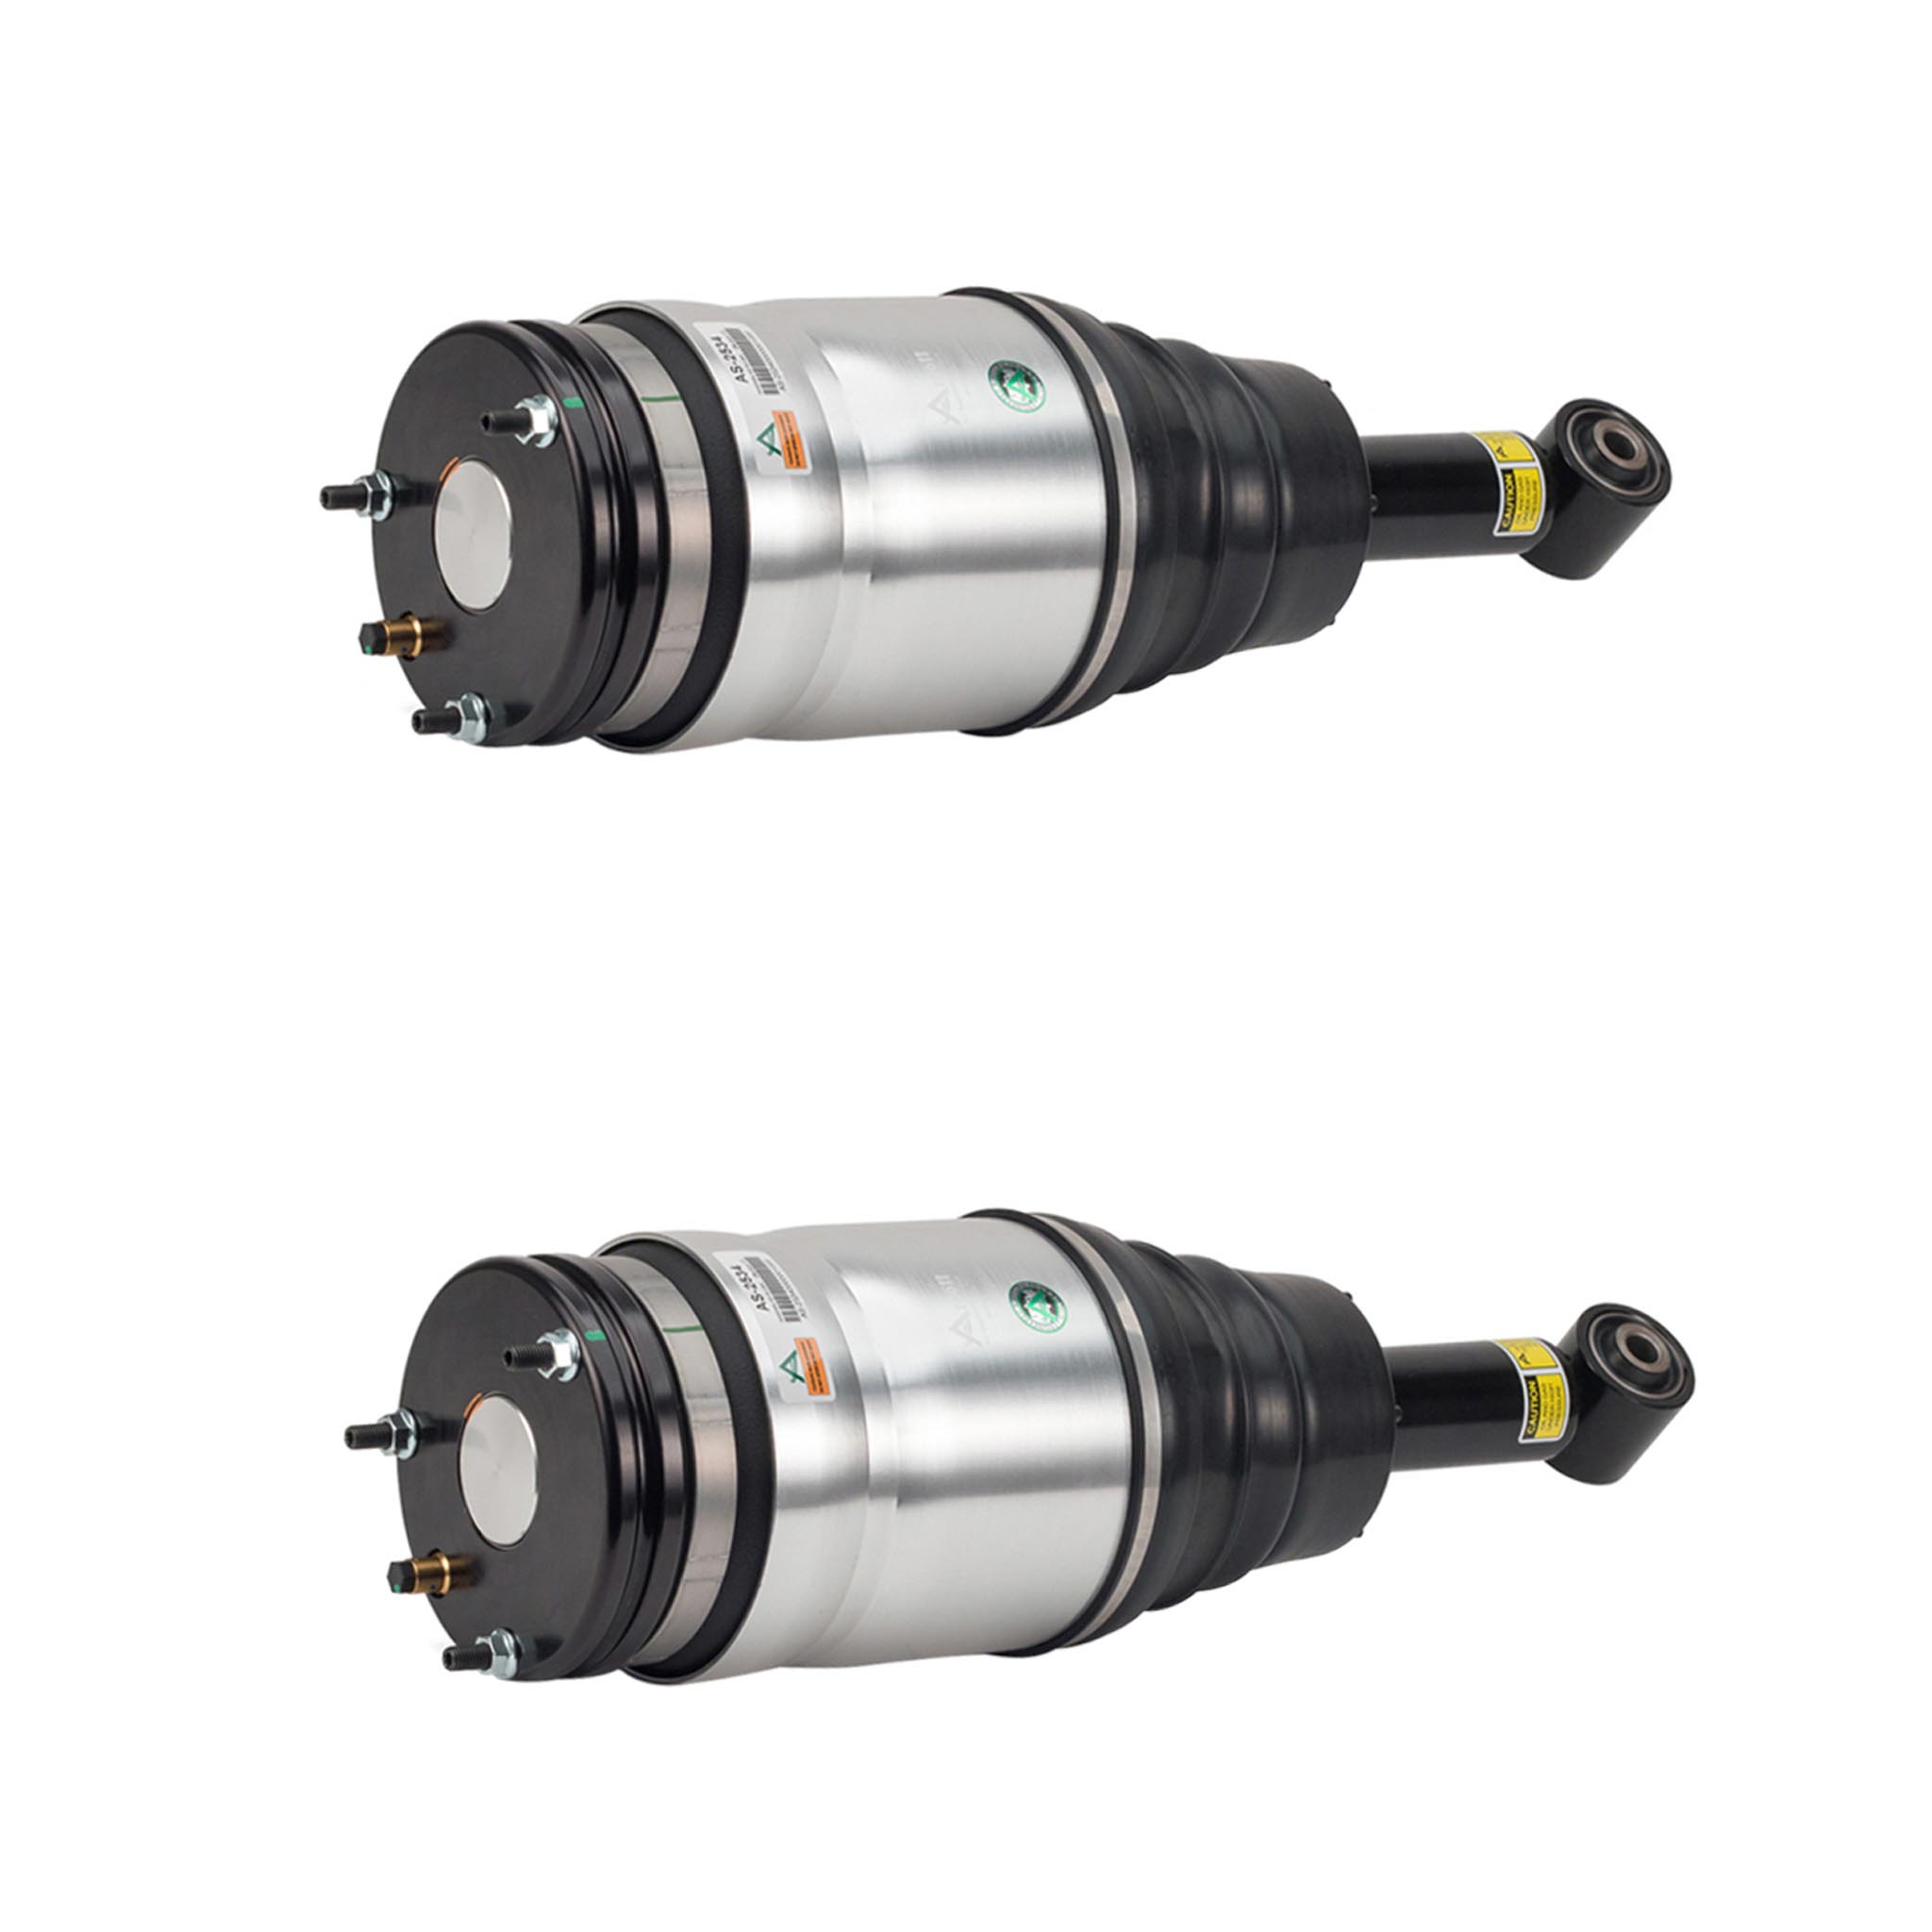 UPC 193331325741 product image for New 2016 Land Rover LR4 Shock and Strut Set - Rear Pair Rear - Pair | upcitemdb.com